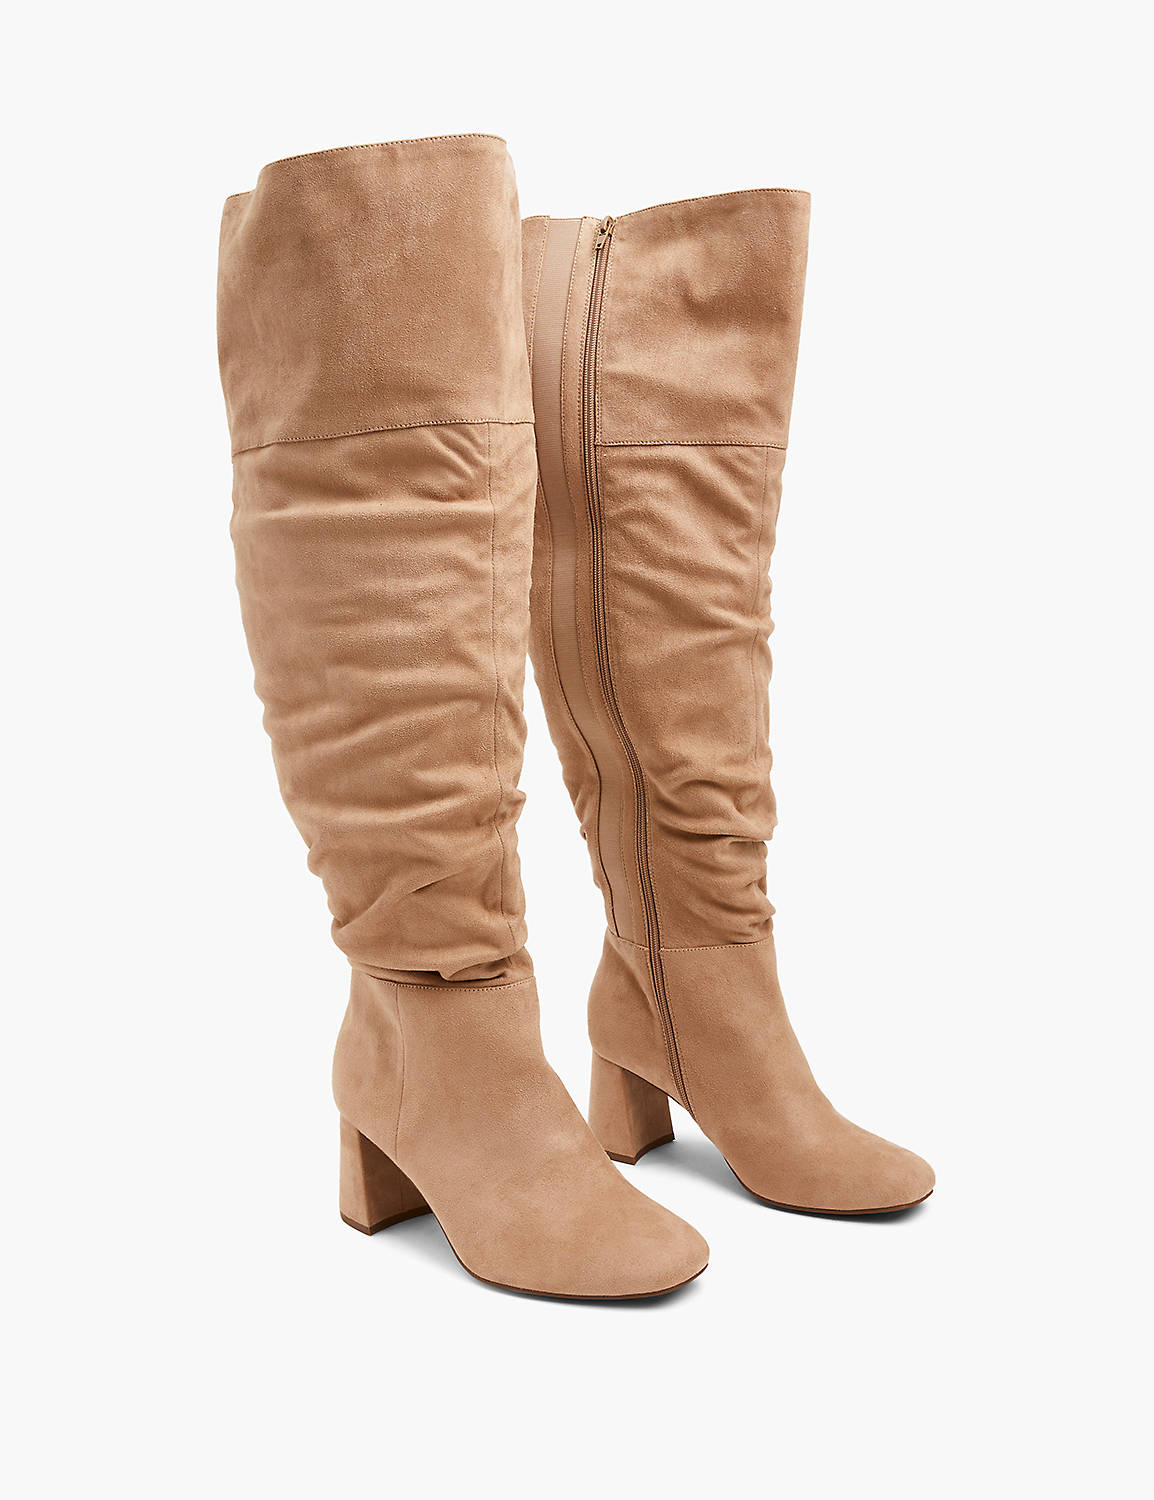 lane bryant dream cloud faux-suede over-the-knee boot 9w brazilian sand